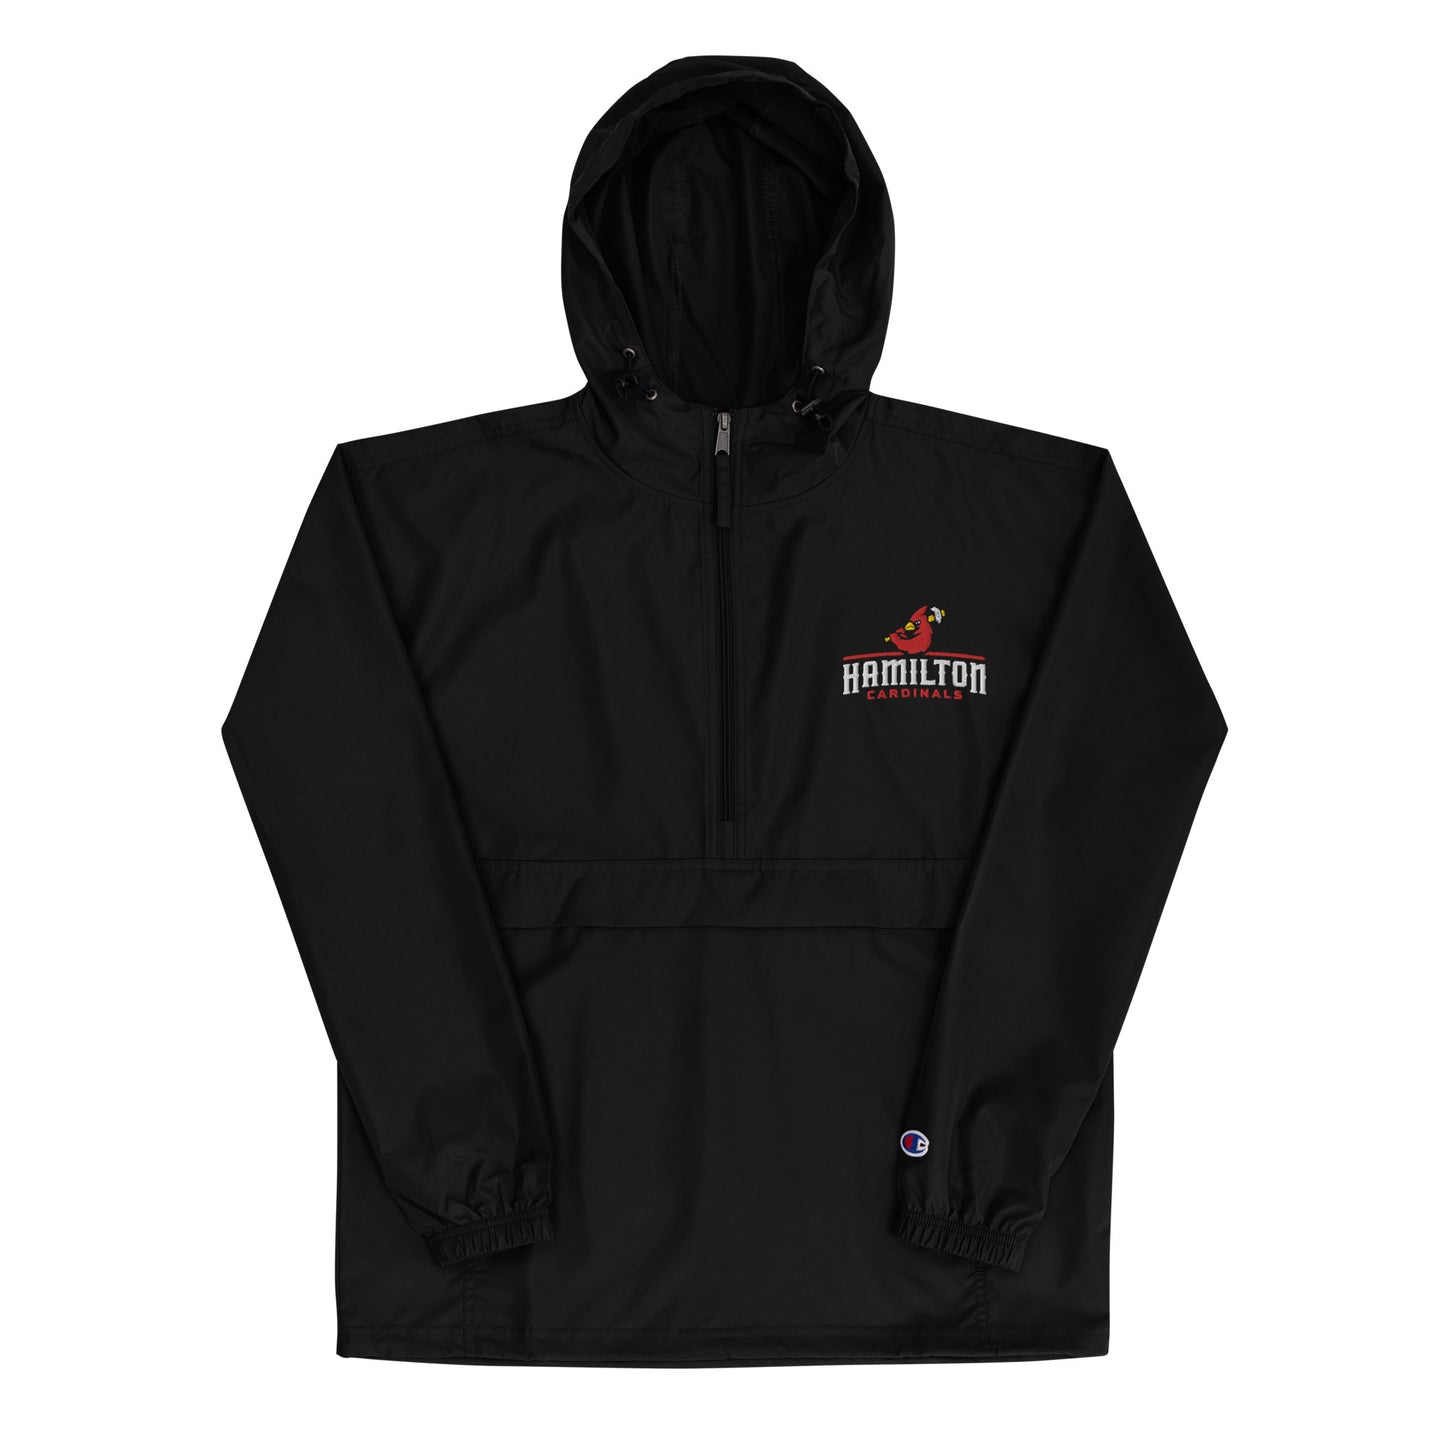 Hamilton Cardinals Embroidered Champion Packable Jacket